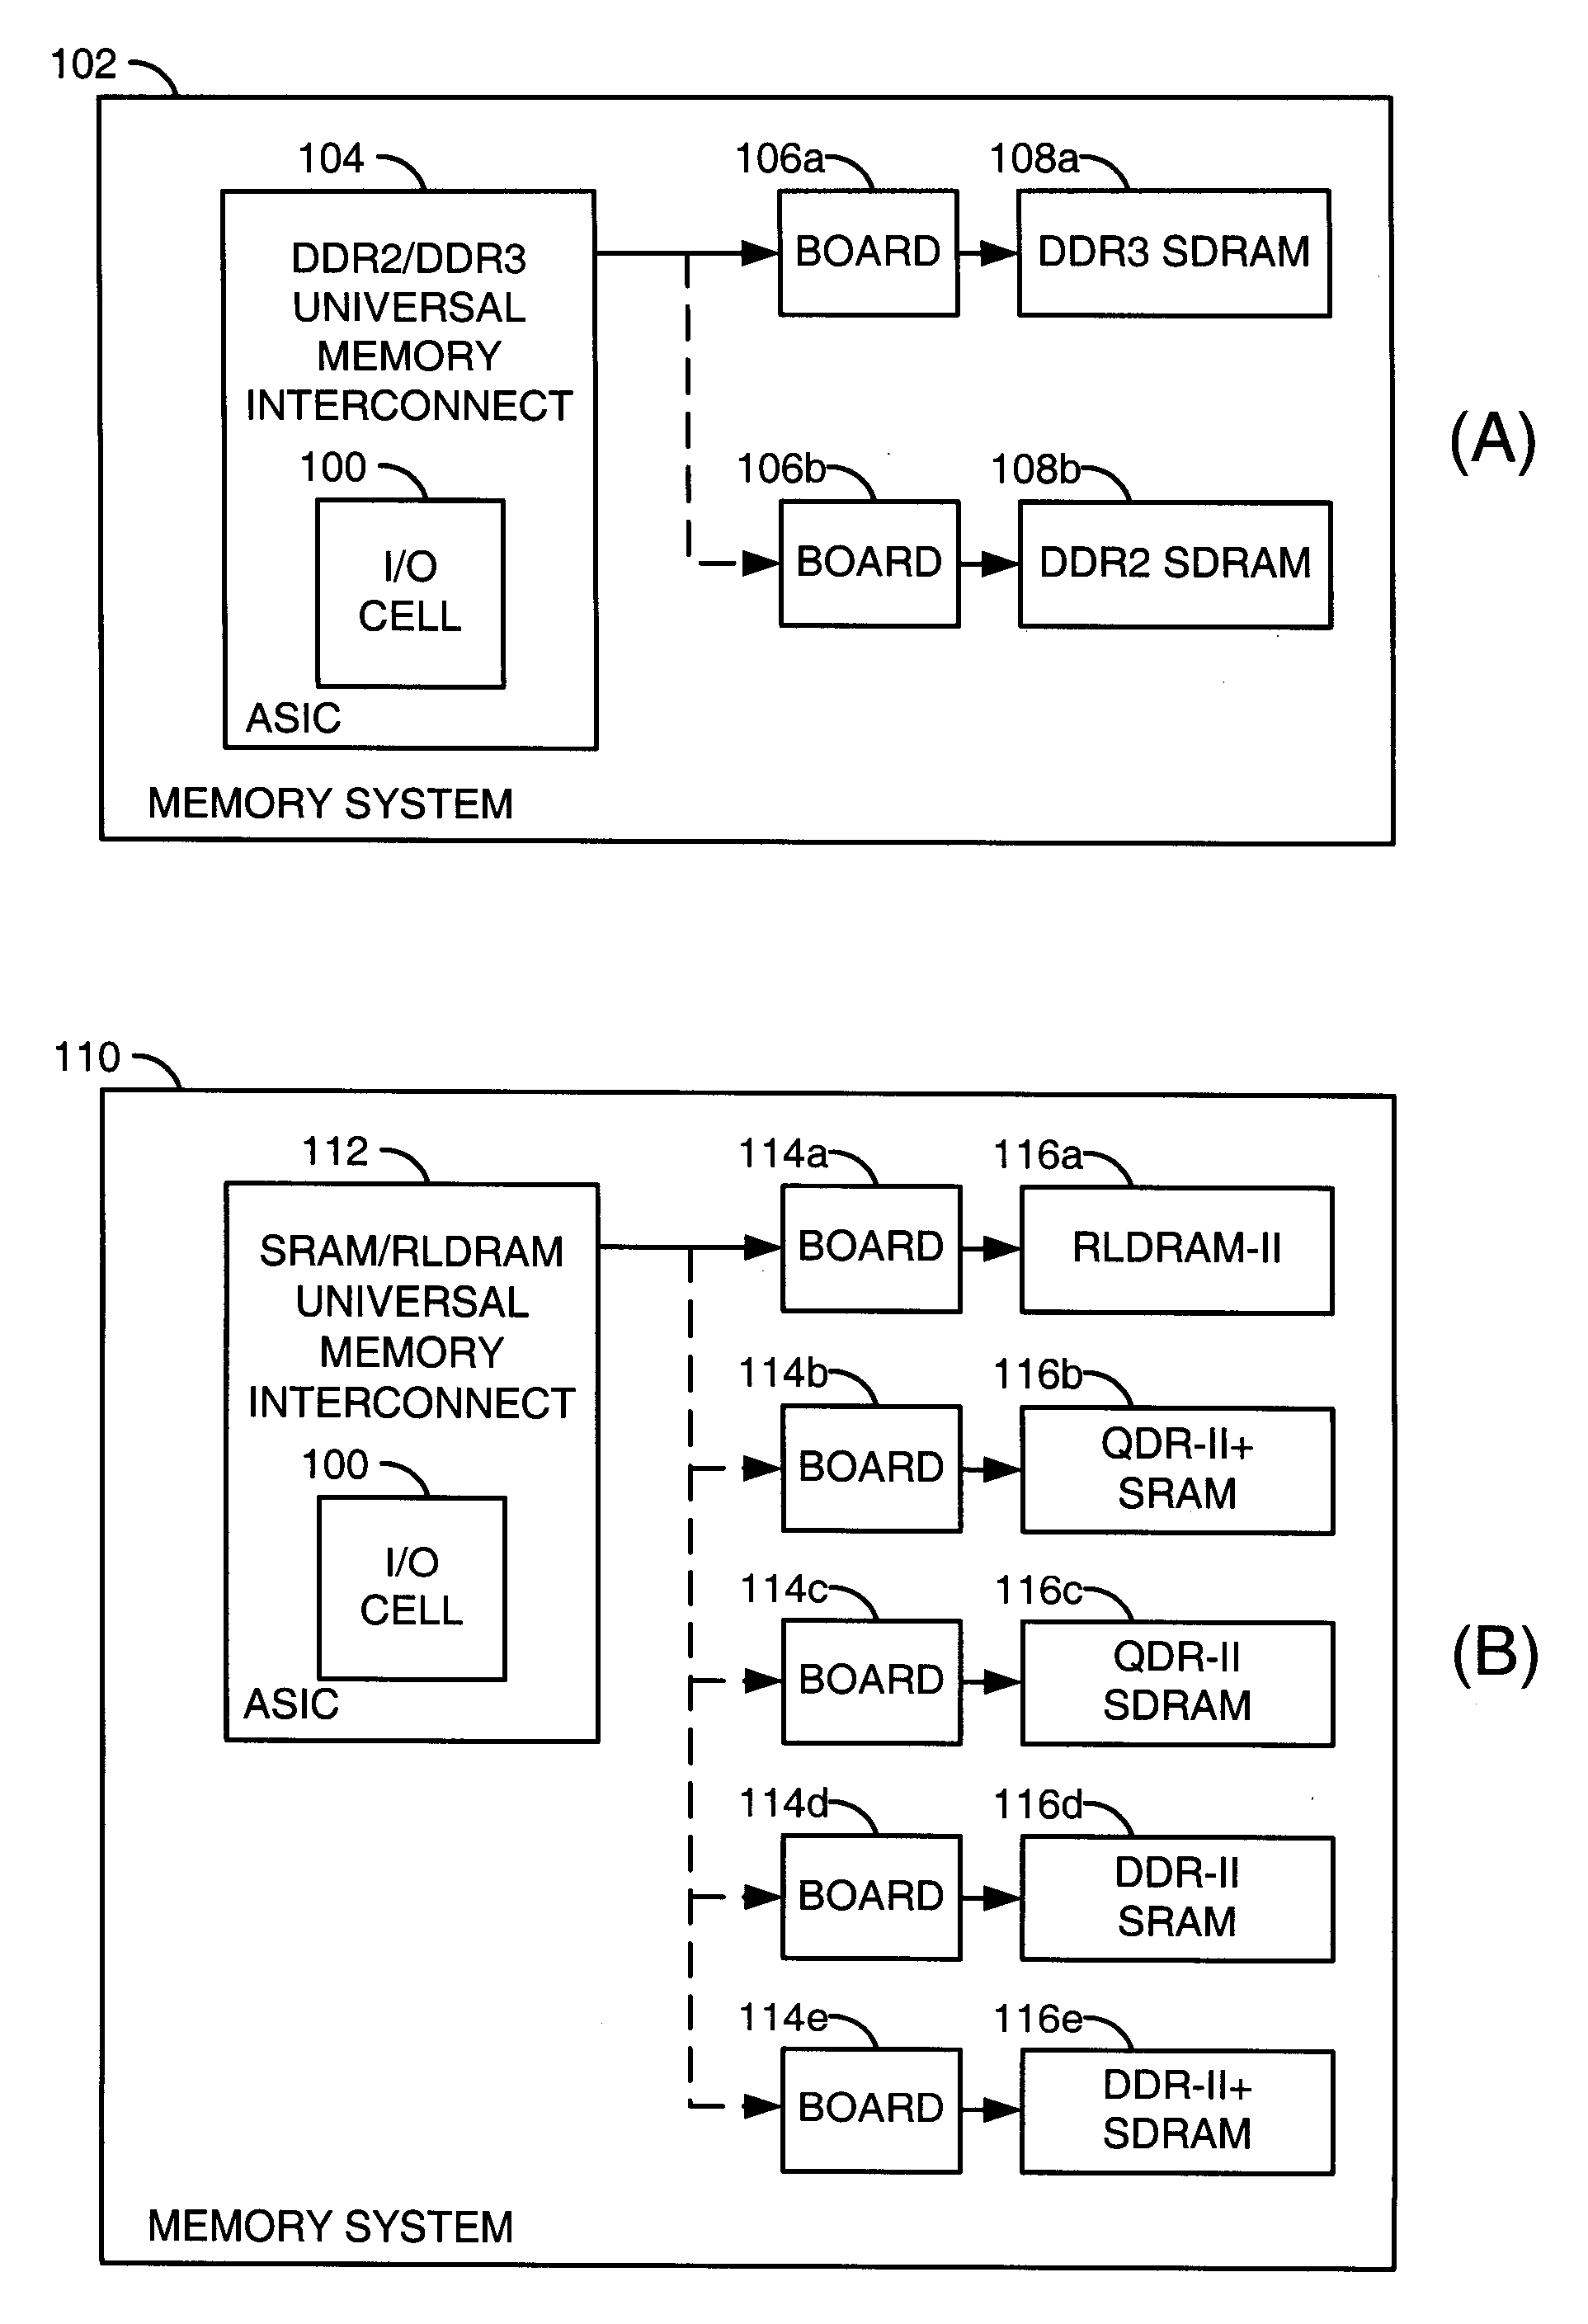 High speed multiple memory interface I/O cell